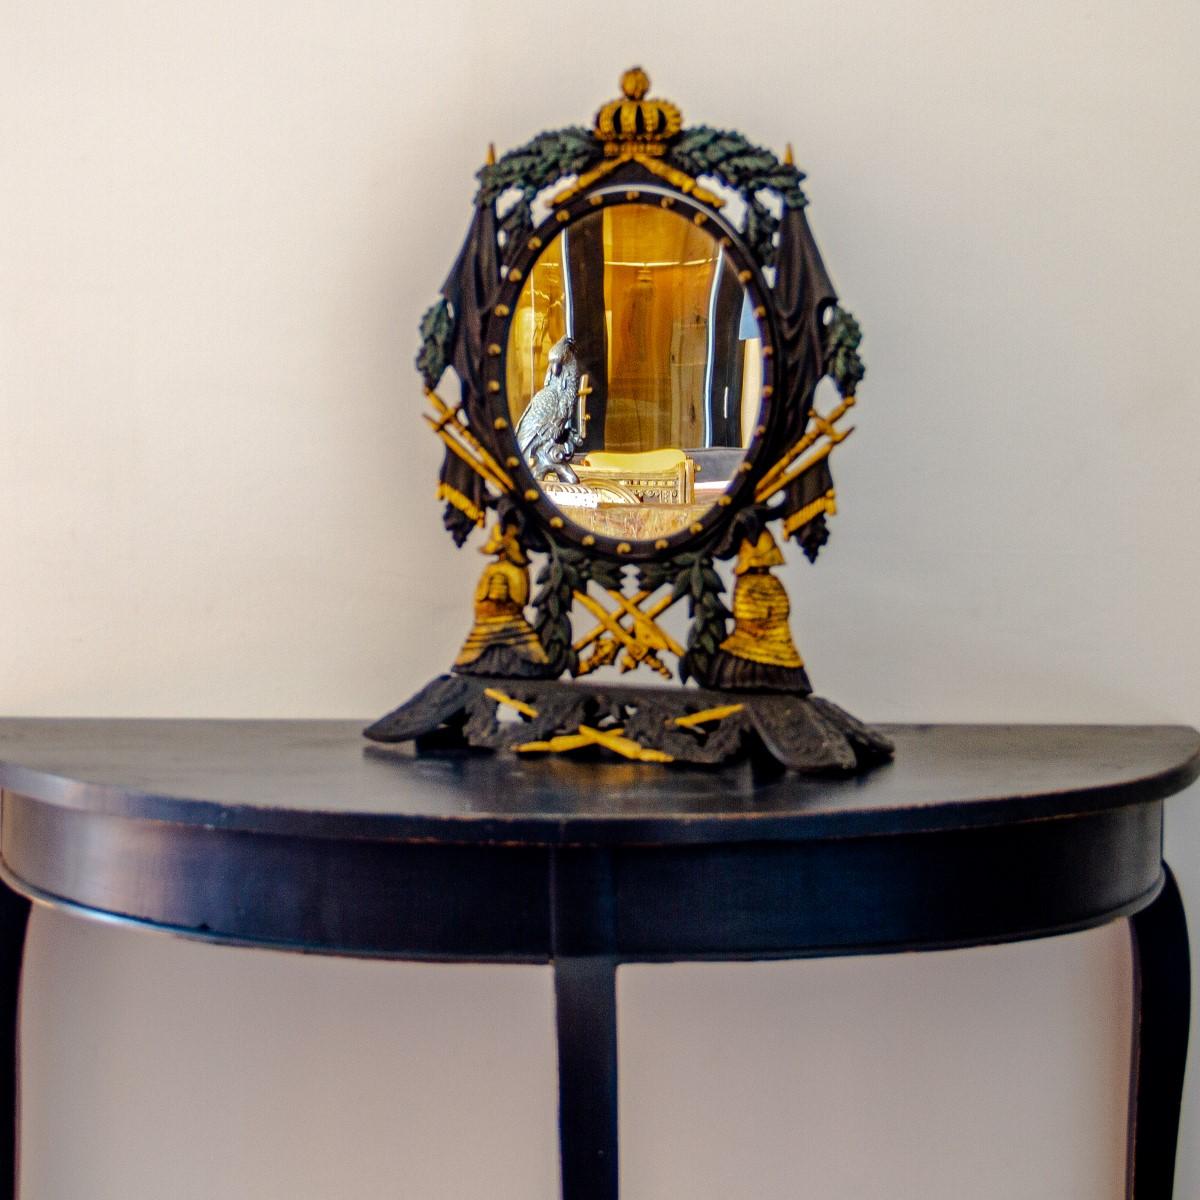 A Swedish cast iron table mirror in the neoclassical manner, with oak leaf detail and gilt painted royal symbols of a crown, weapons and flanked with helmeted figures. The central oval mirror pivots and is decorated with gilt beading, circa 1840.